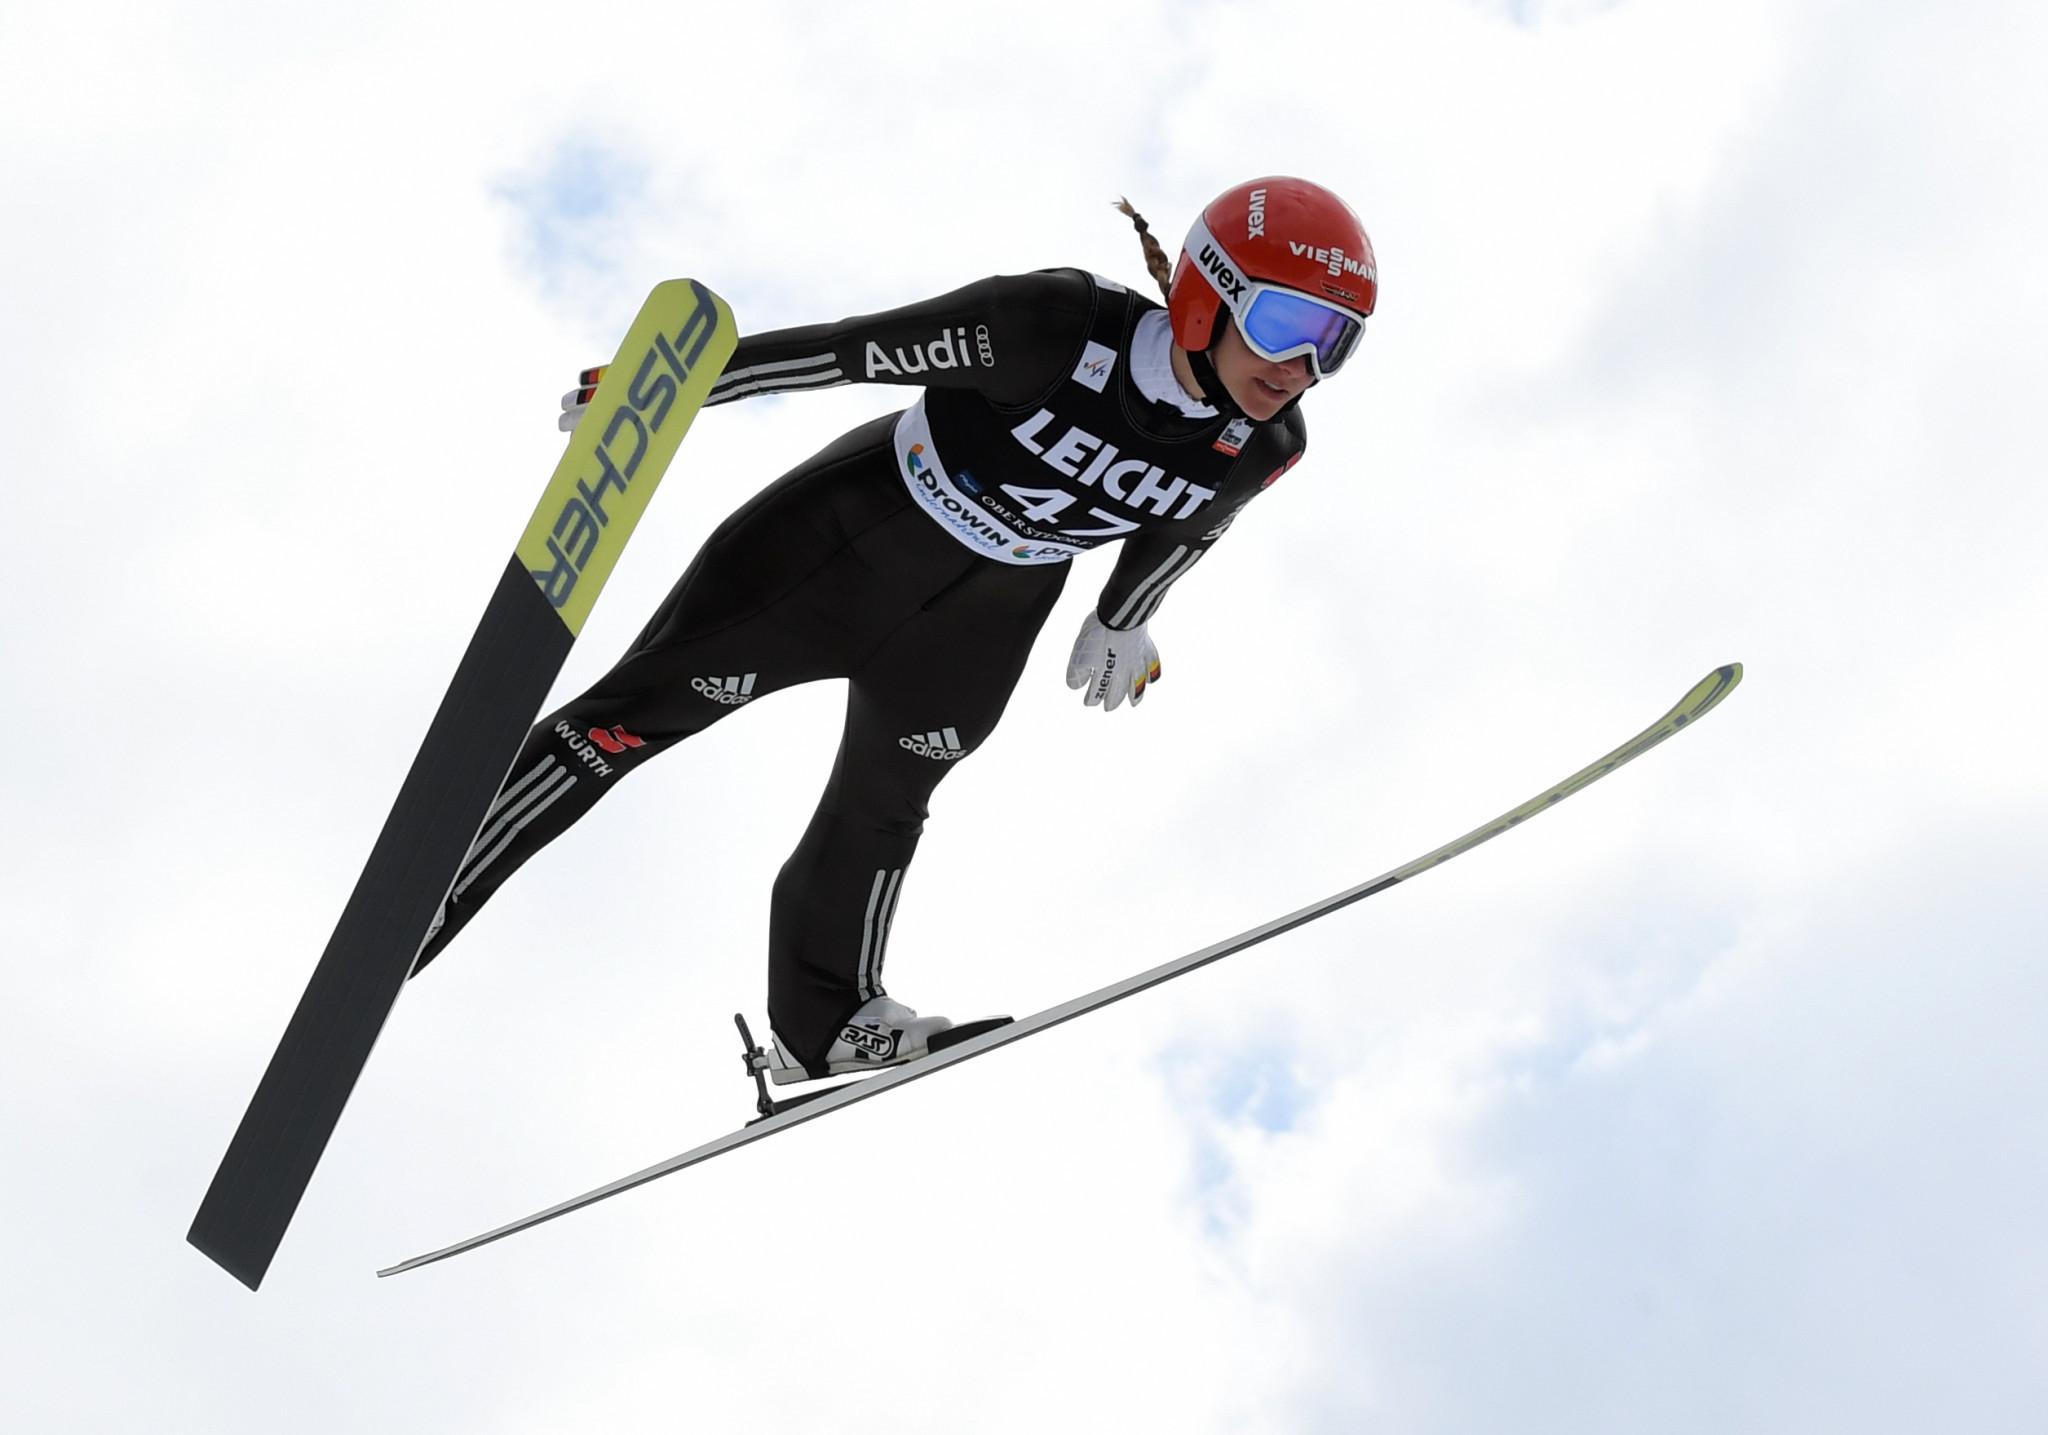 Katharina Althaus won the women's ski jumping contest today ©Getty Images